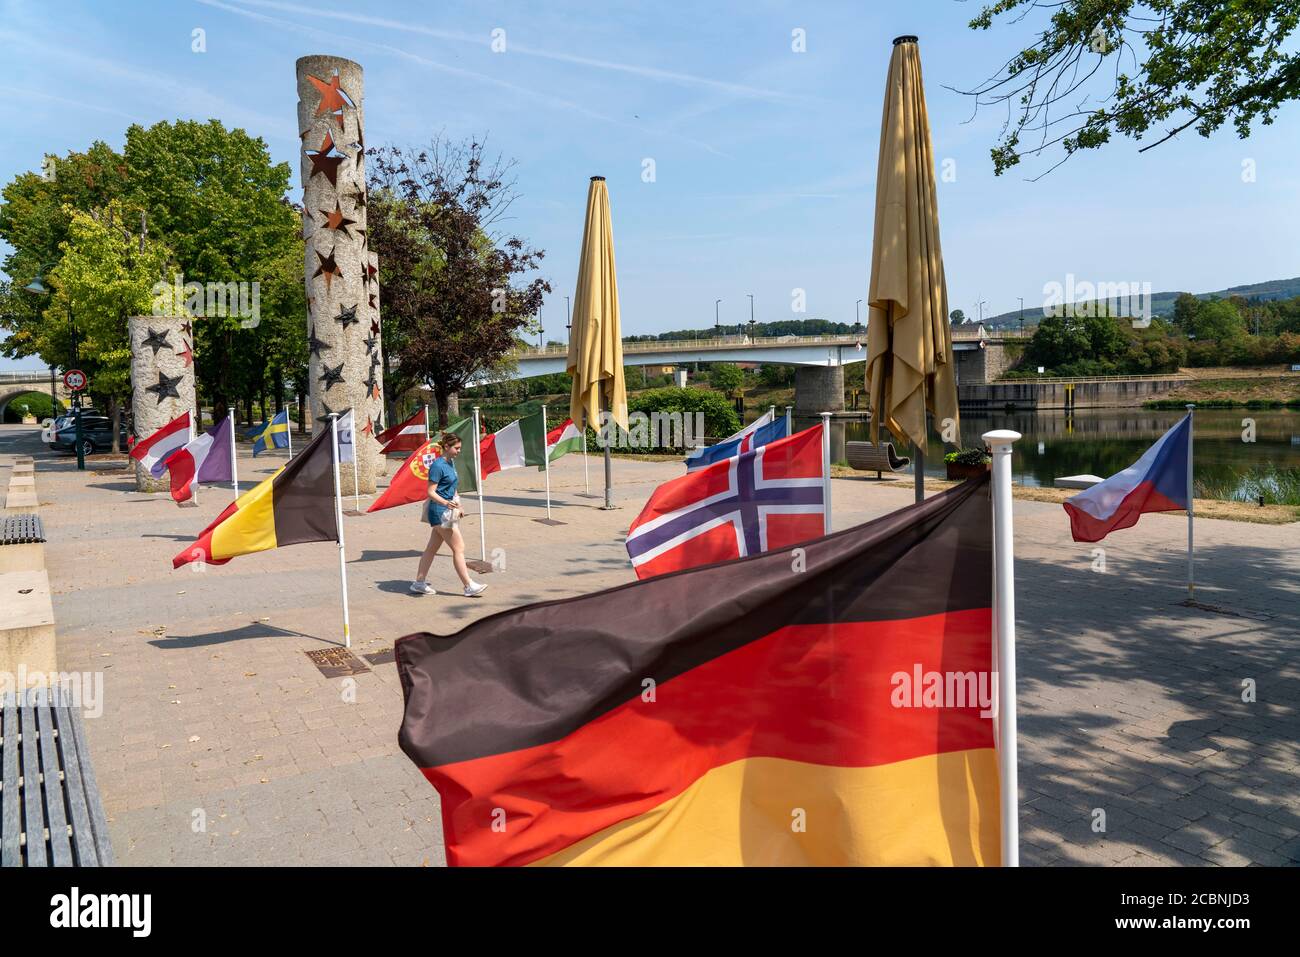 The town of Schengen, on the Moselle, in the Grand Duchy of Luxembourg, where the Schengen Agreement of 1985 was signed, European Monument at the Muse Stock Photo